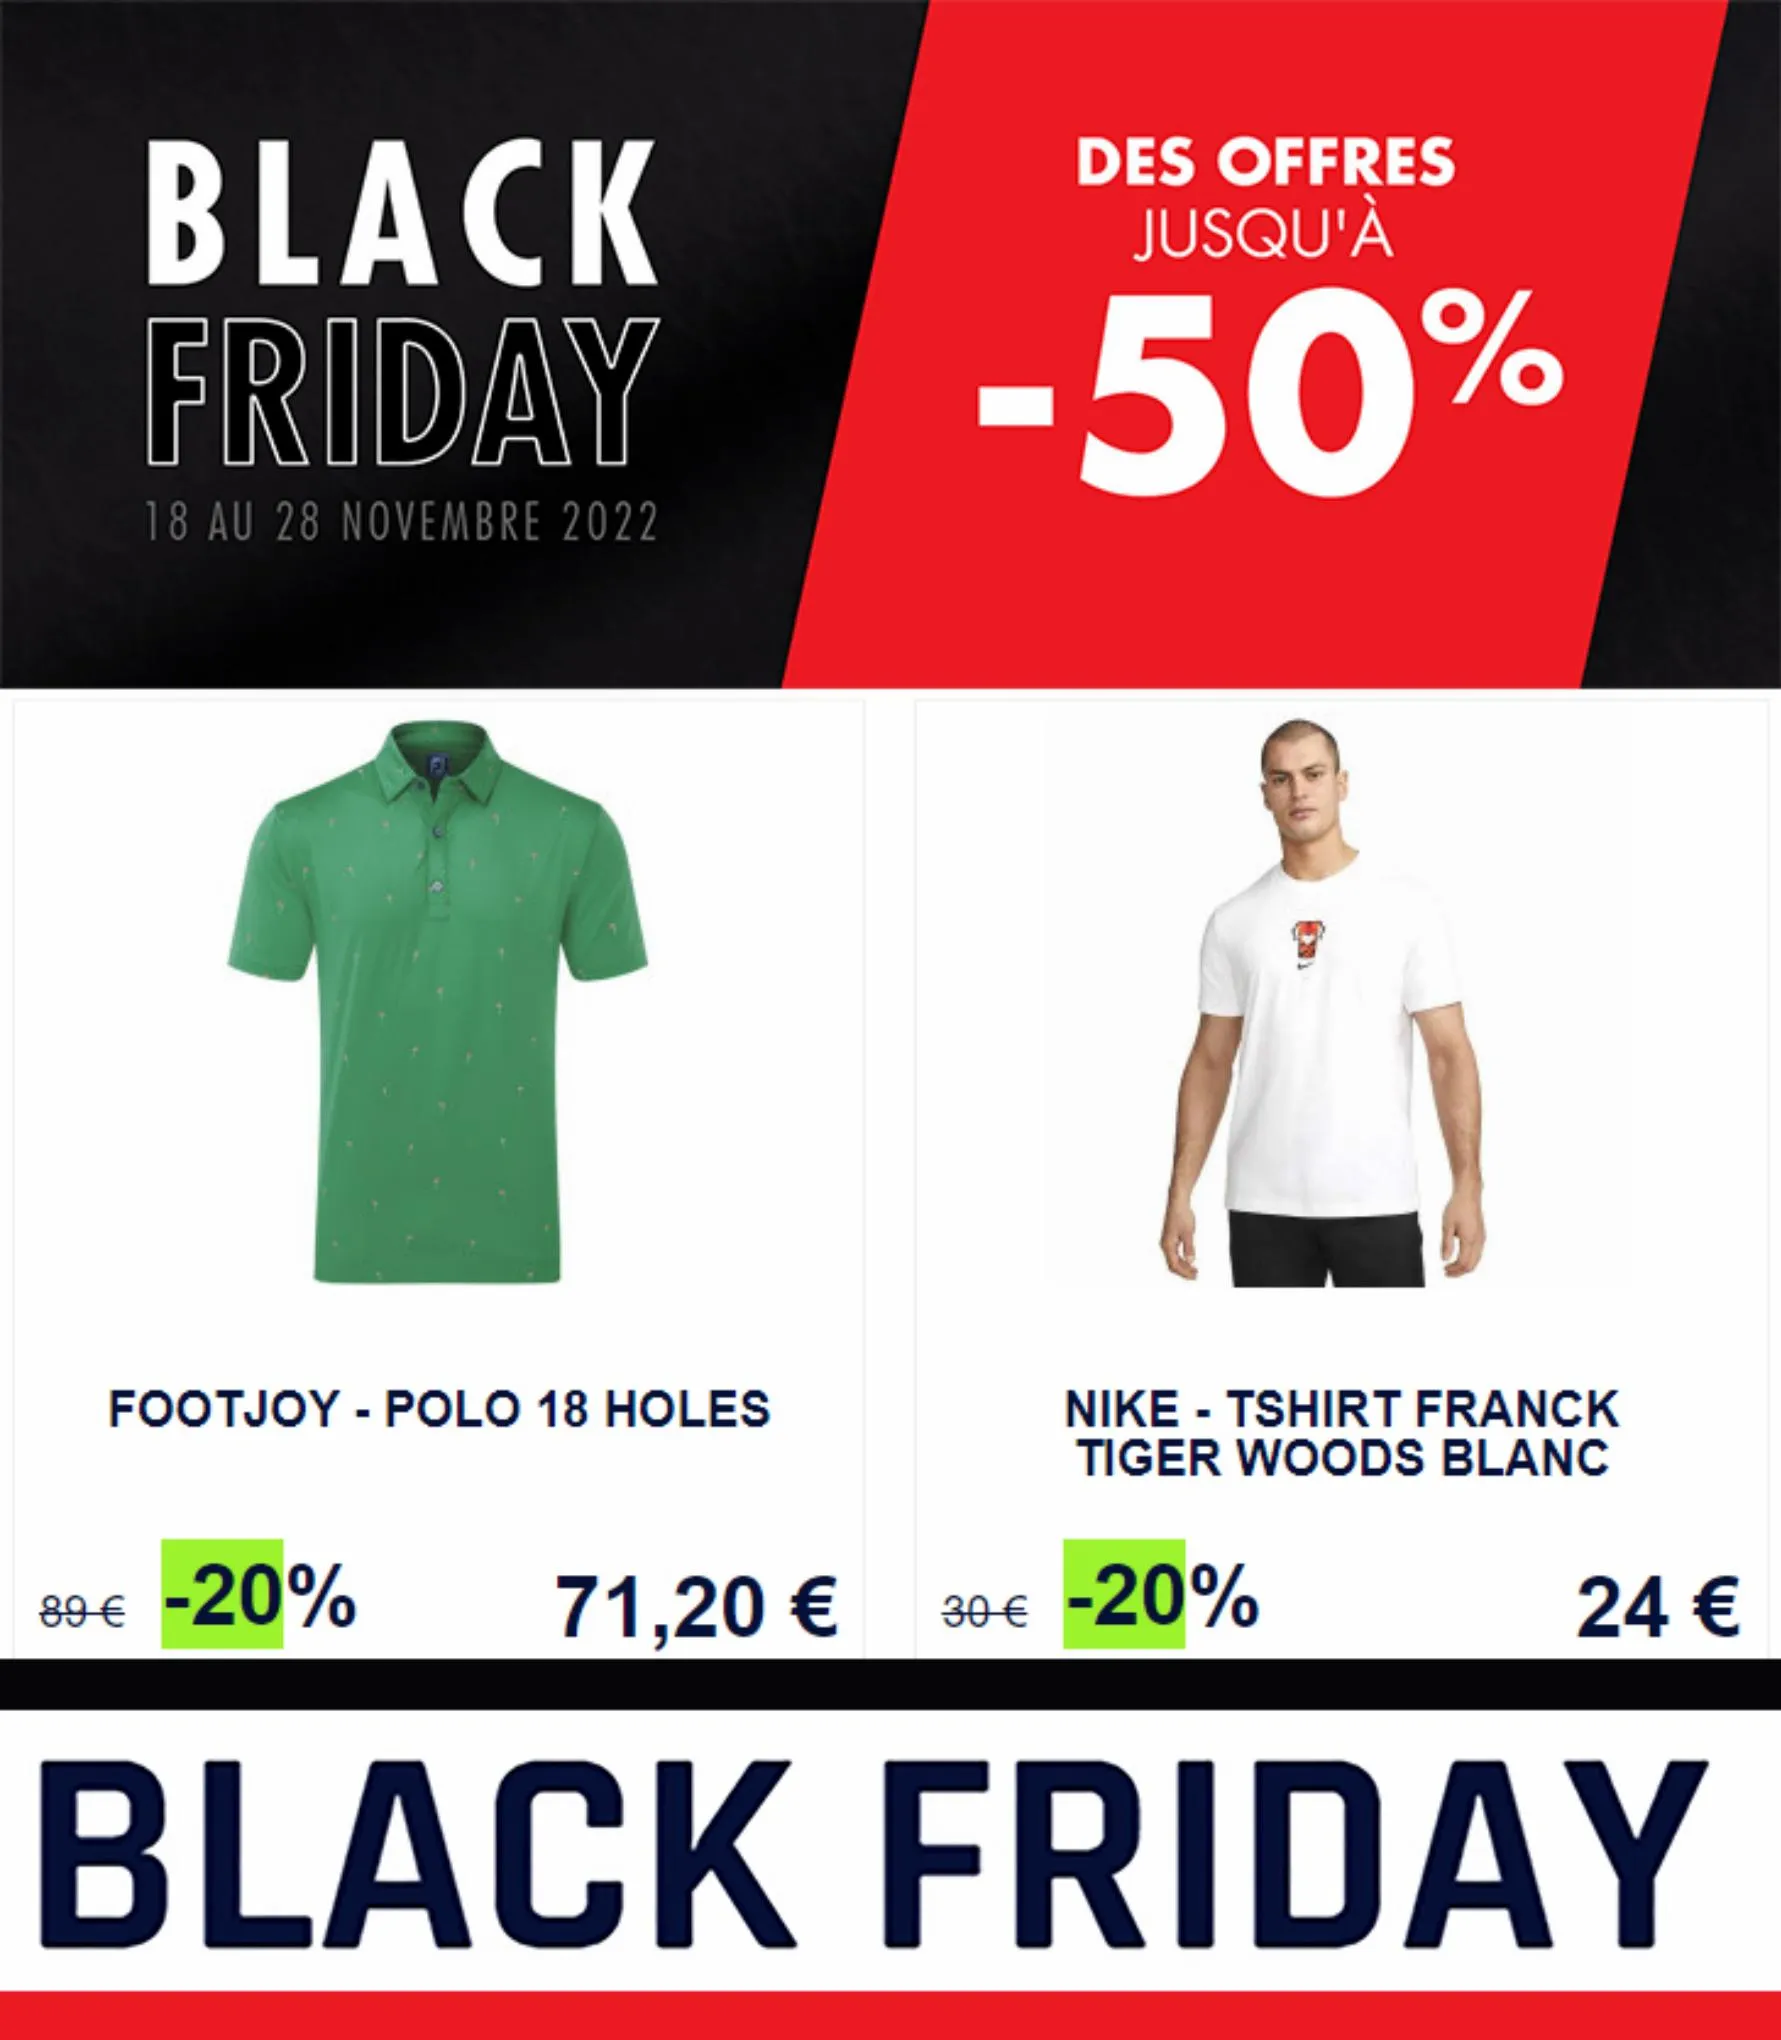 Catalogue Black Friday Offers -50%!, page 00005